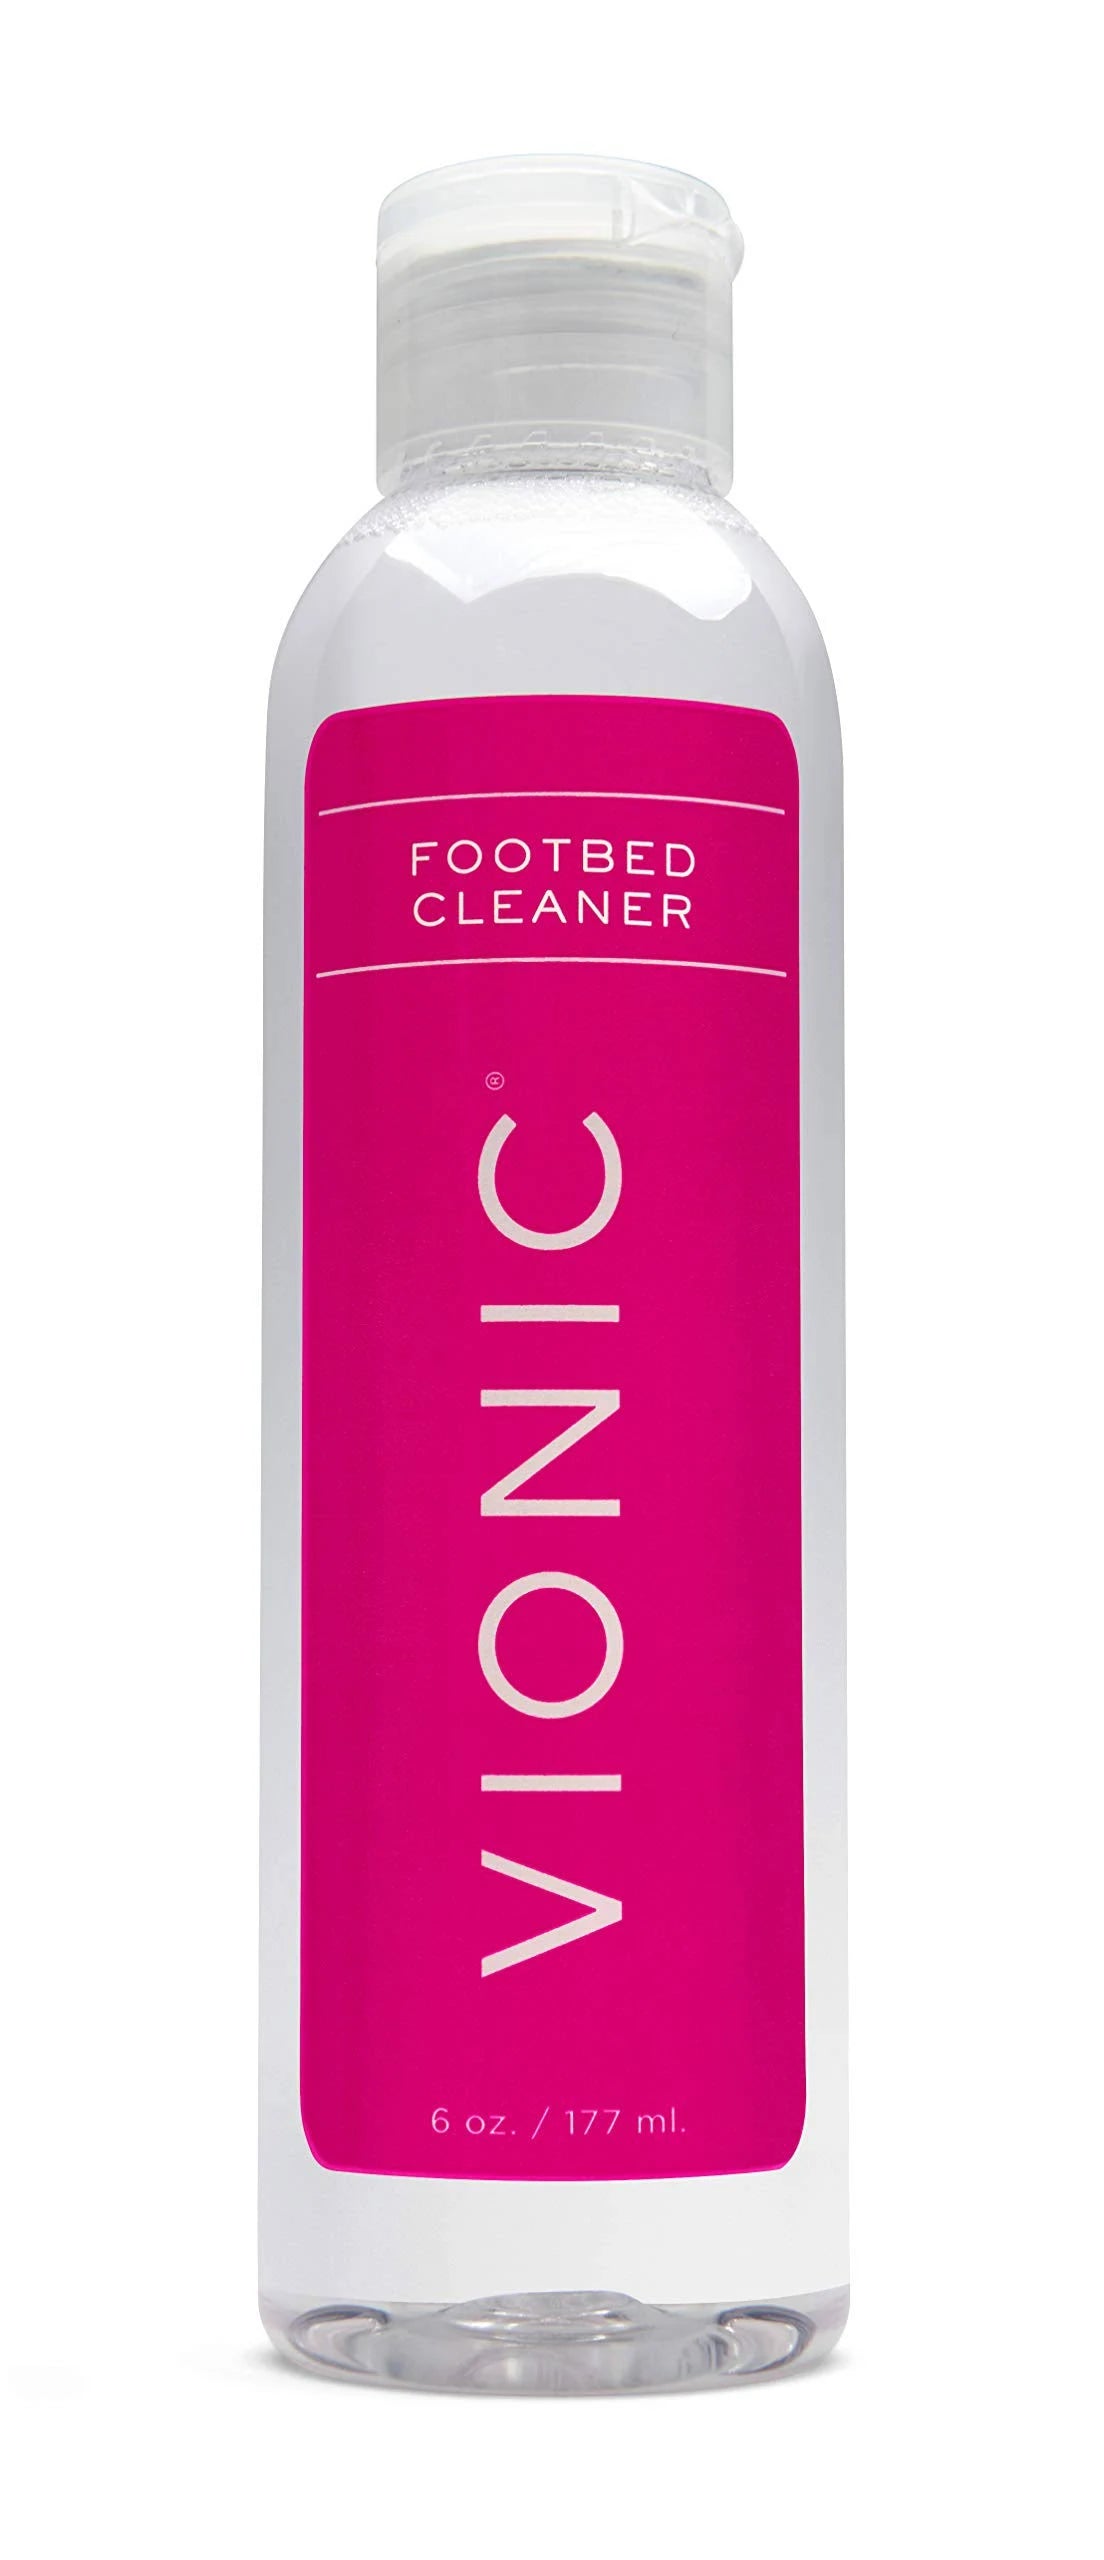 Vionic Footbed Cleaner